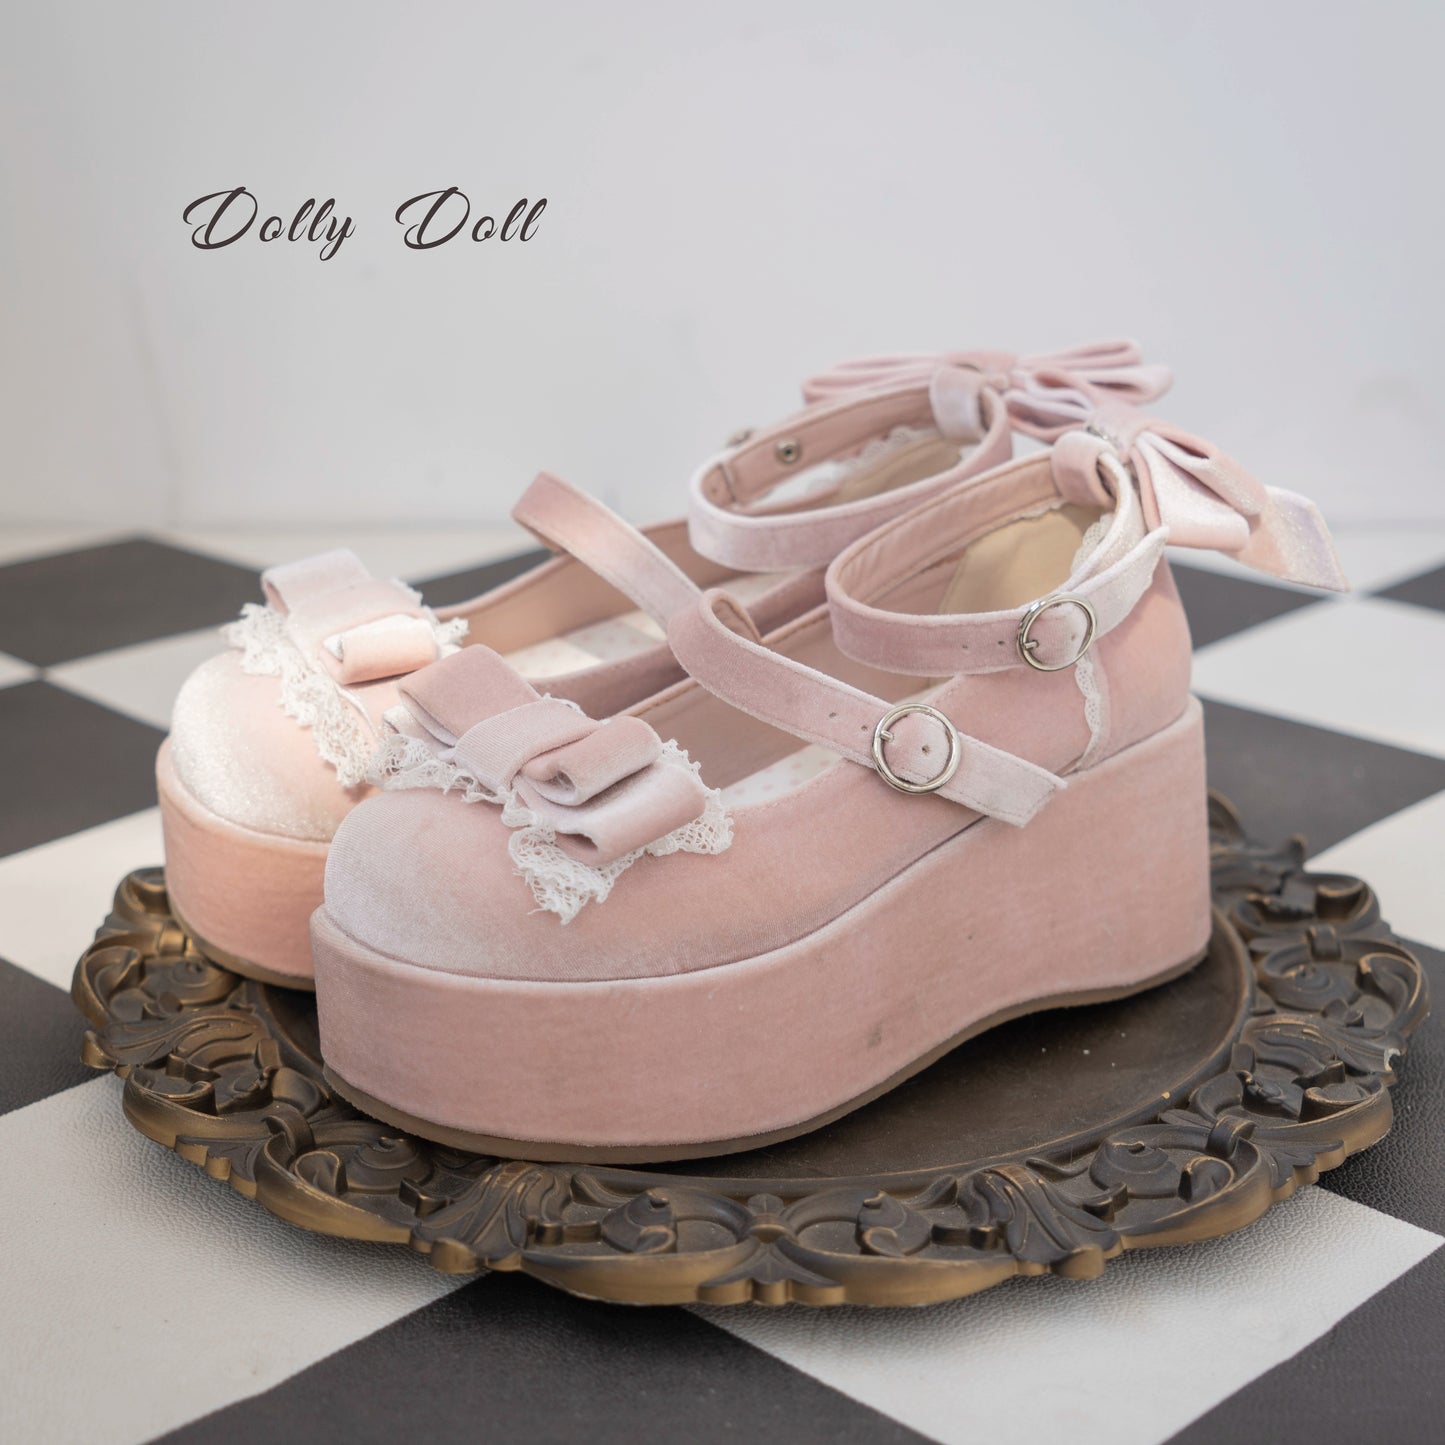 Lolita Shoes Round-Toe Platform Shoes With Velvet Bow 37132:552712